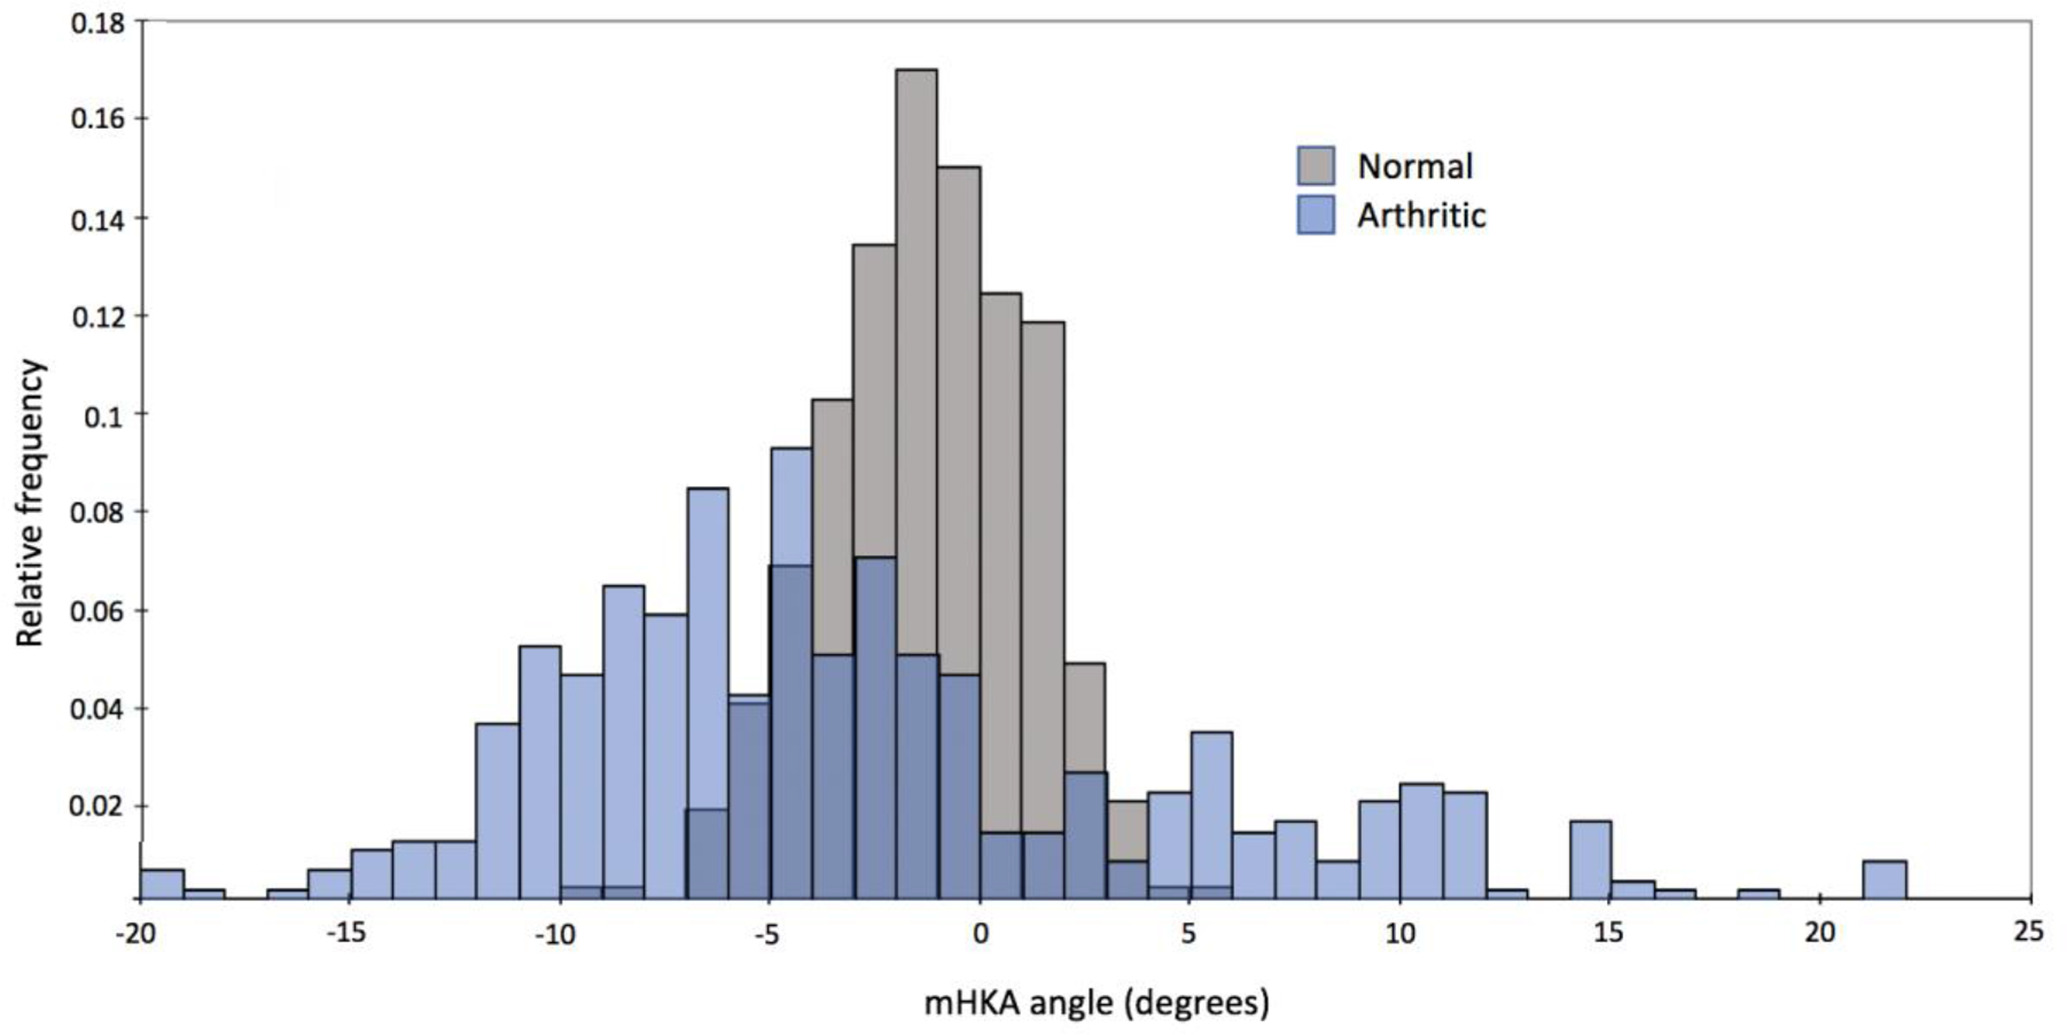 Fig. 3 
            Mechanical hip-knee-ankle angle (mHKA) of normal and arthritic groups showing wide variation in alignments. Negative values on horizontal axis represent varus, with positive values representing valgus.
          